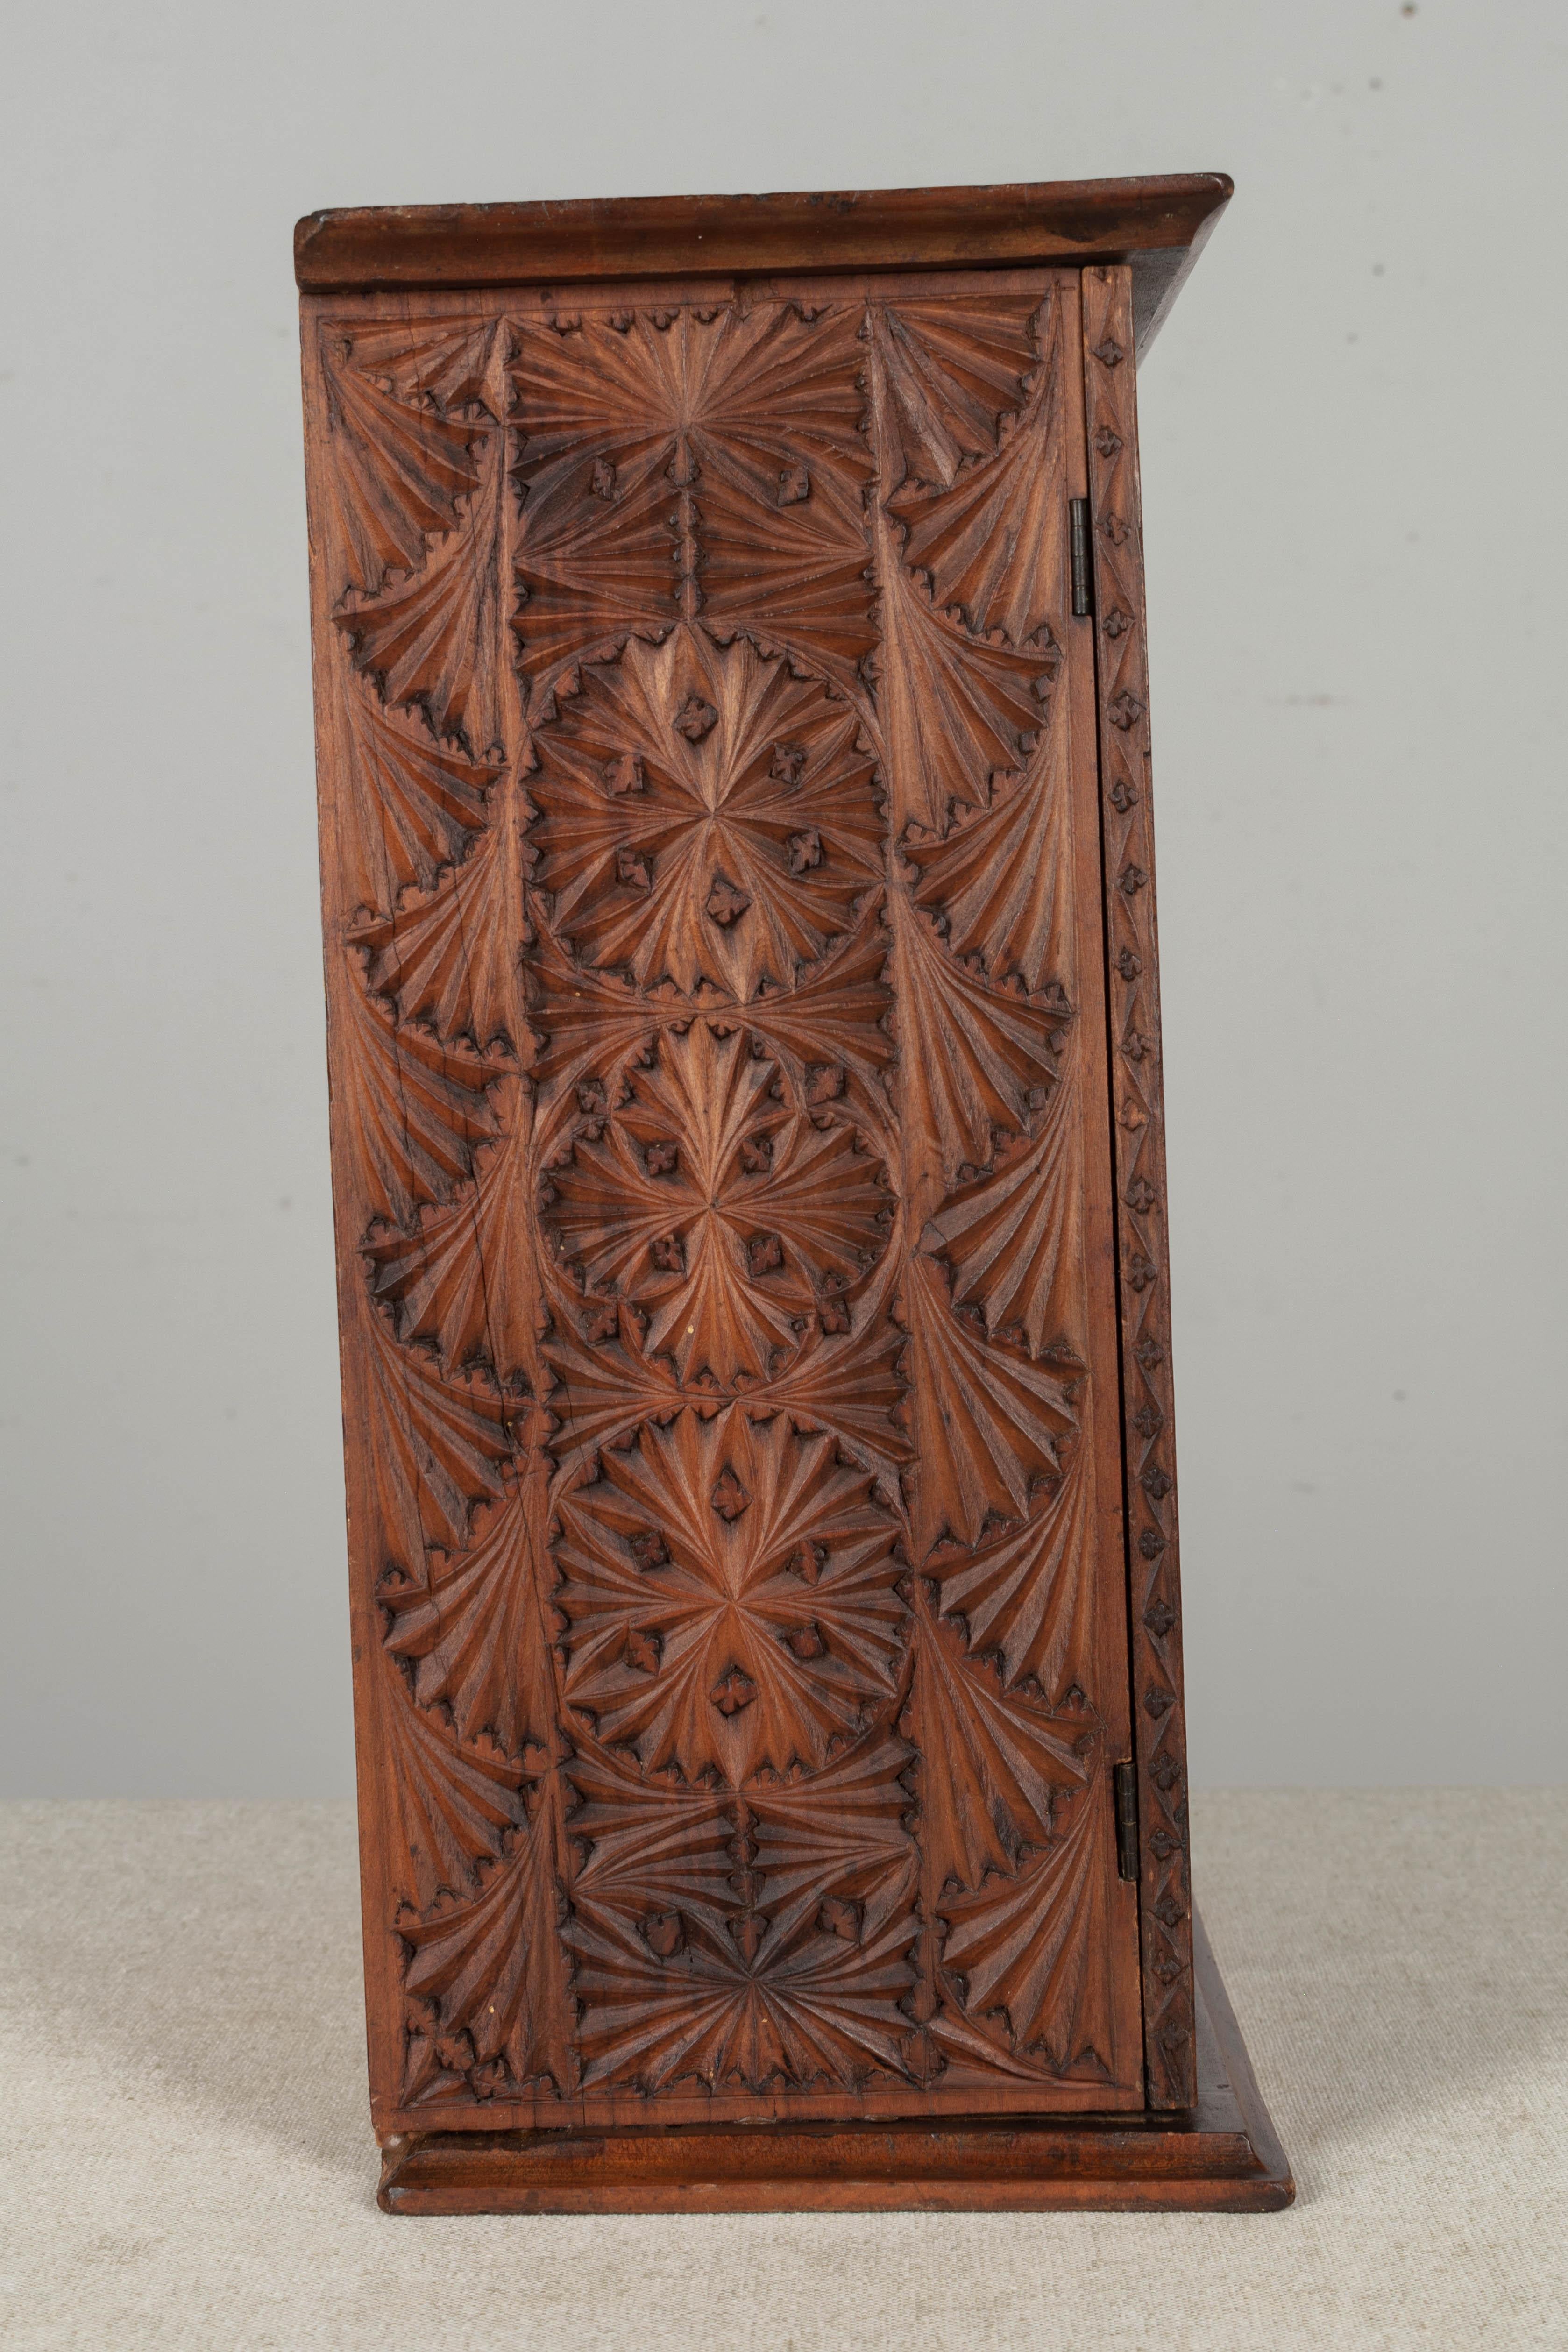 19th Century French Carved Wooden Box In Good Condition For Sale In Winter Park, FL